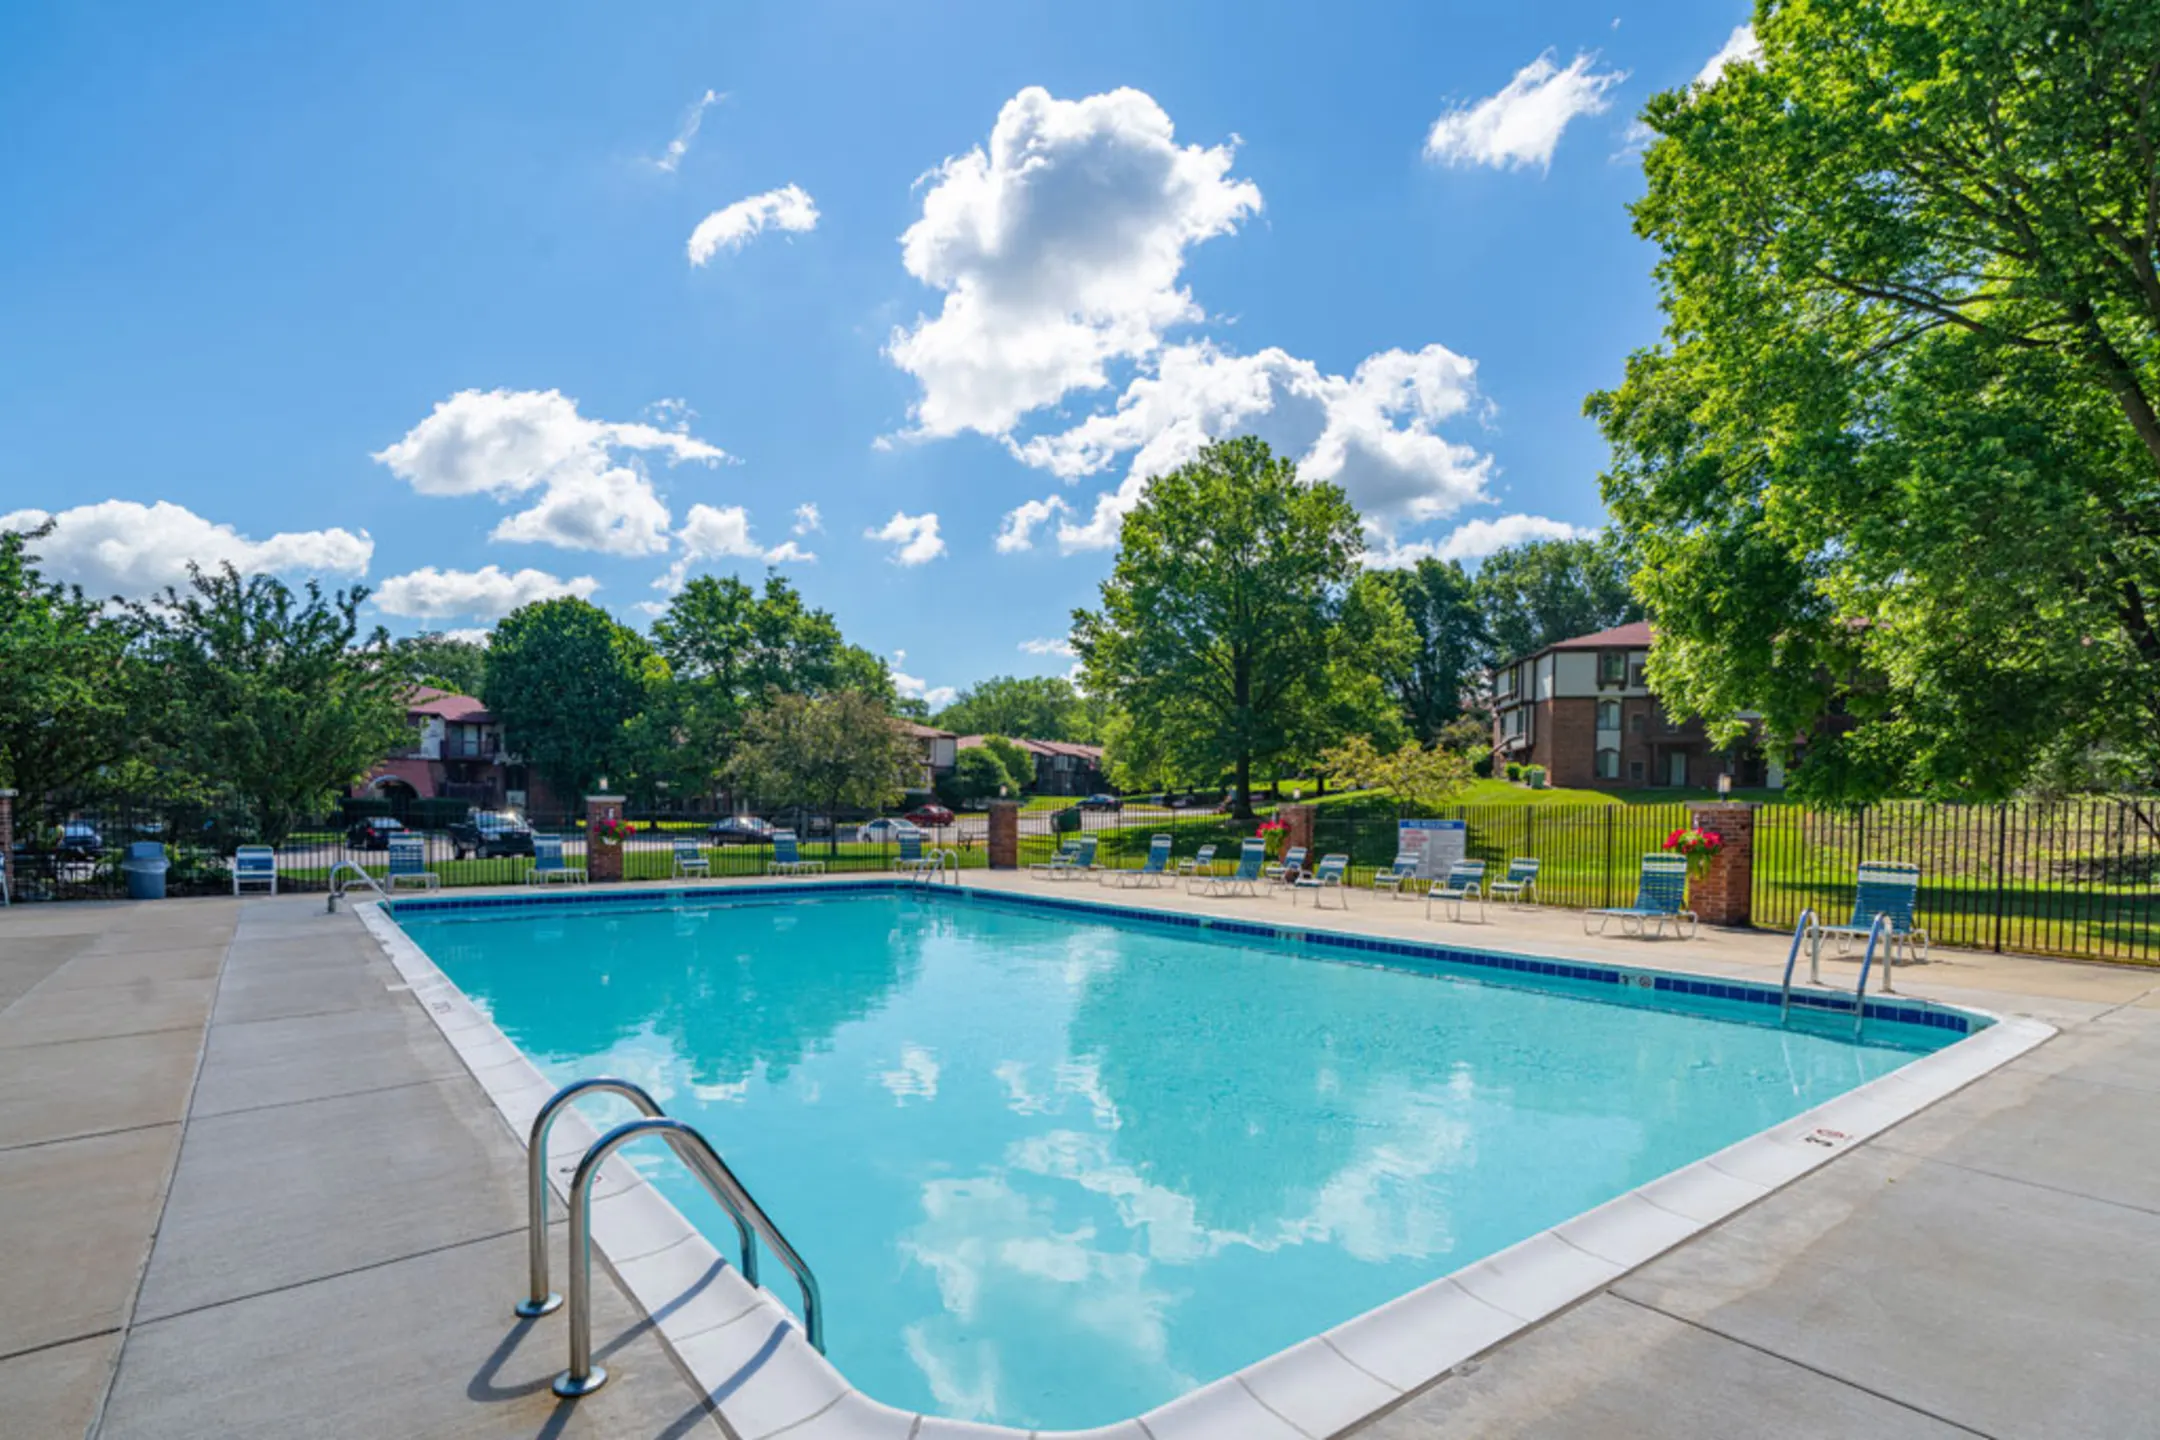 Pool - Old Farm Apartments - Elkhart, IN